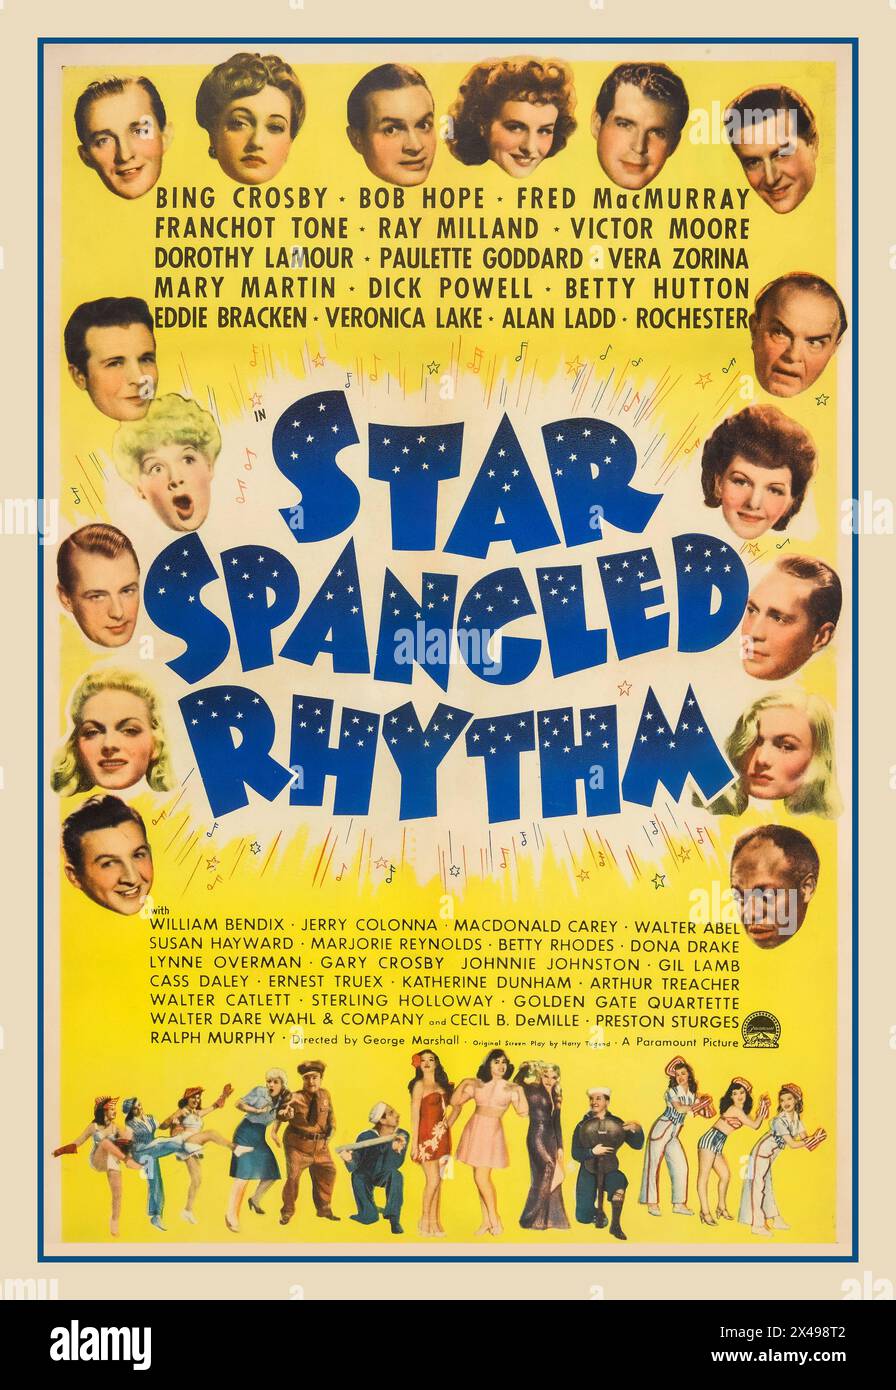 'Star Spangled Rhythm' vintage WW2 propaganda entertainment film movie, a 1942 American all-star cast including Bing Crosby, Bob Hope, Ray Milland, Alan Ladd etc., musical film made by Paramount Pictures during World War II as a morale booster. Many of the Hollywood studios produced such films during the war, generally musicals, frequently with flimsy storylines, and with the specific intent of entertaining the troops overseas and civilians back home and to encourage fundraising – as well as to show the studios' patriotism. This film was also the first released by Paramount for 8 weeks. Stock Photo